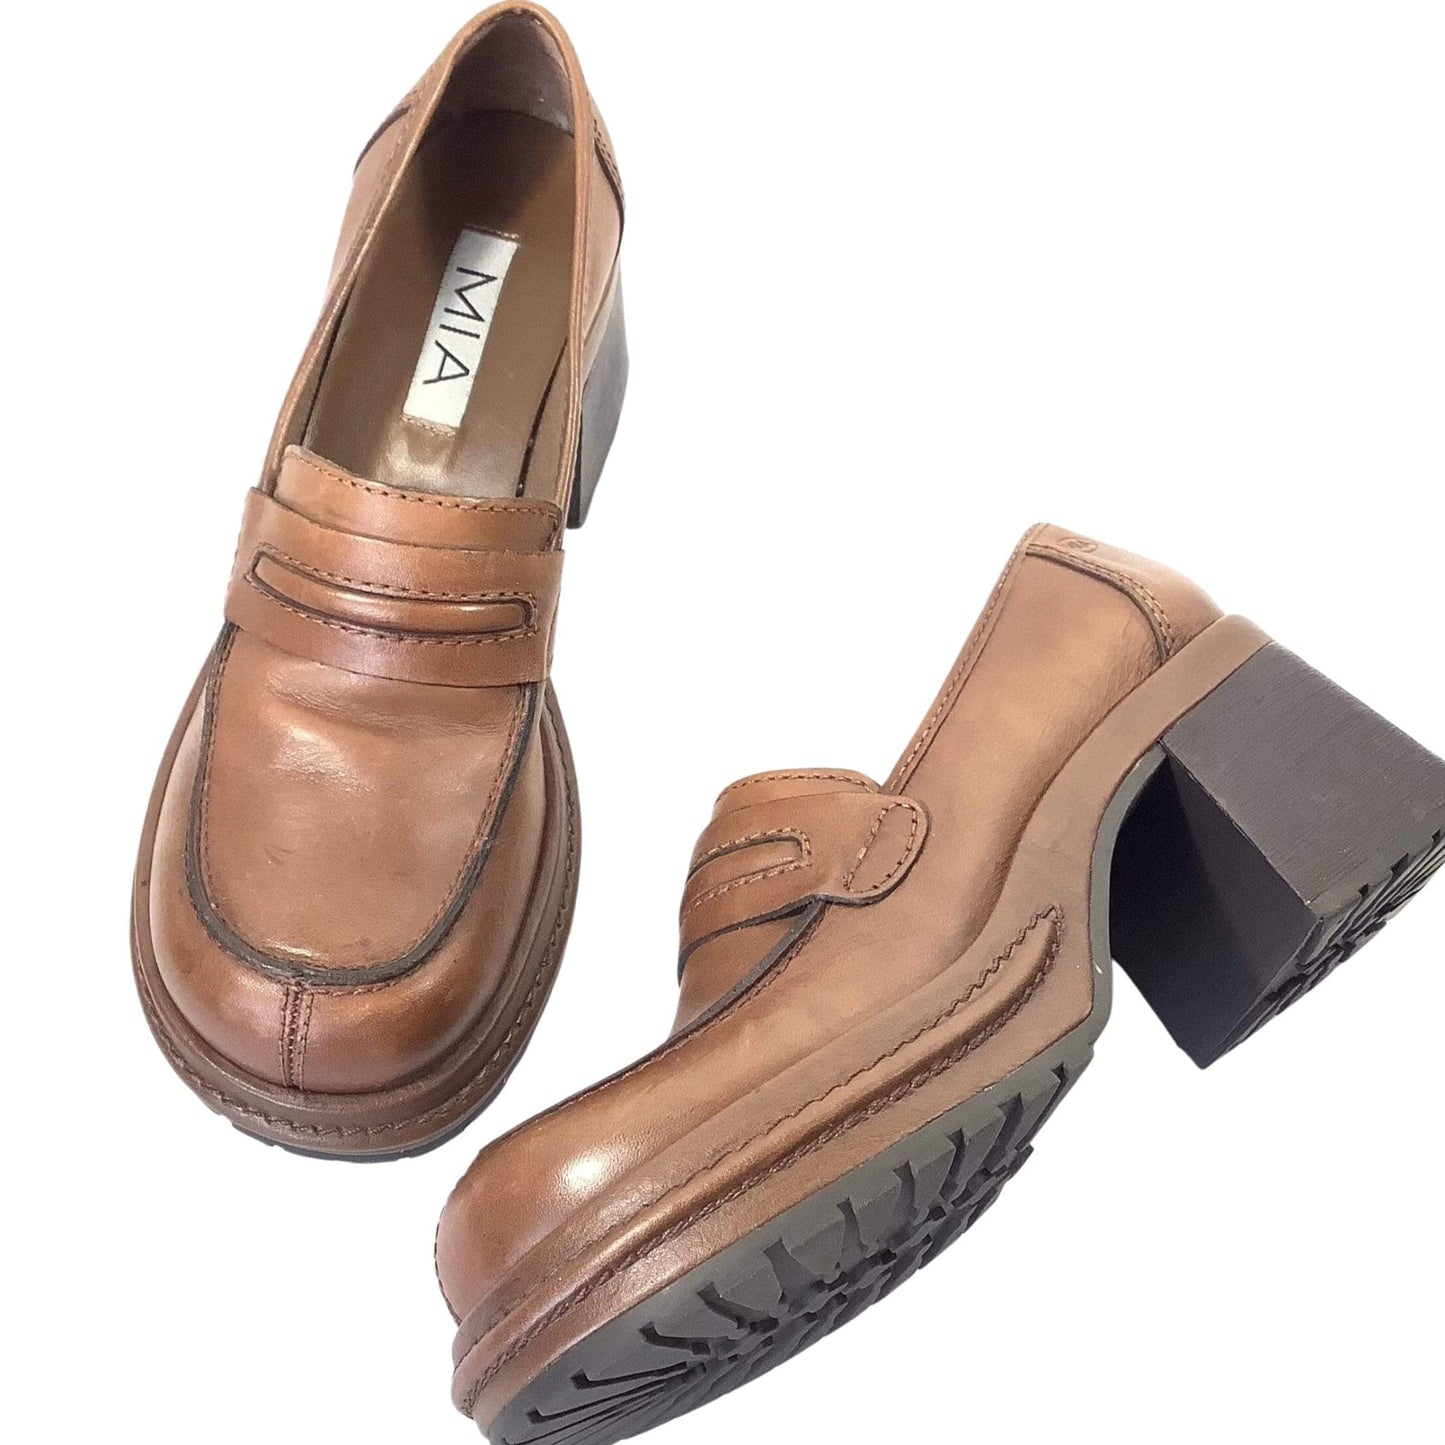 Chunky Mia Loafers 8 / Tan / Y2K - Now